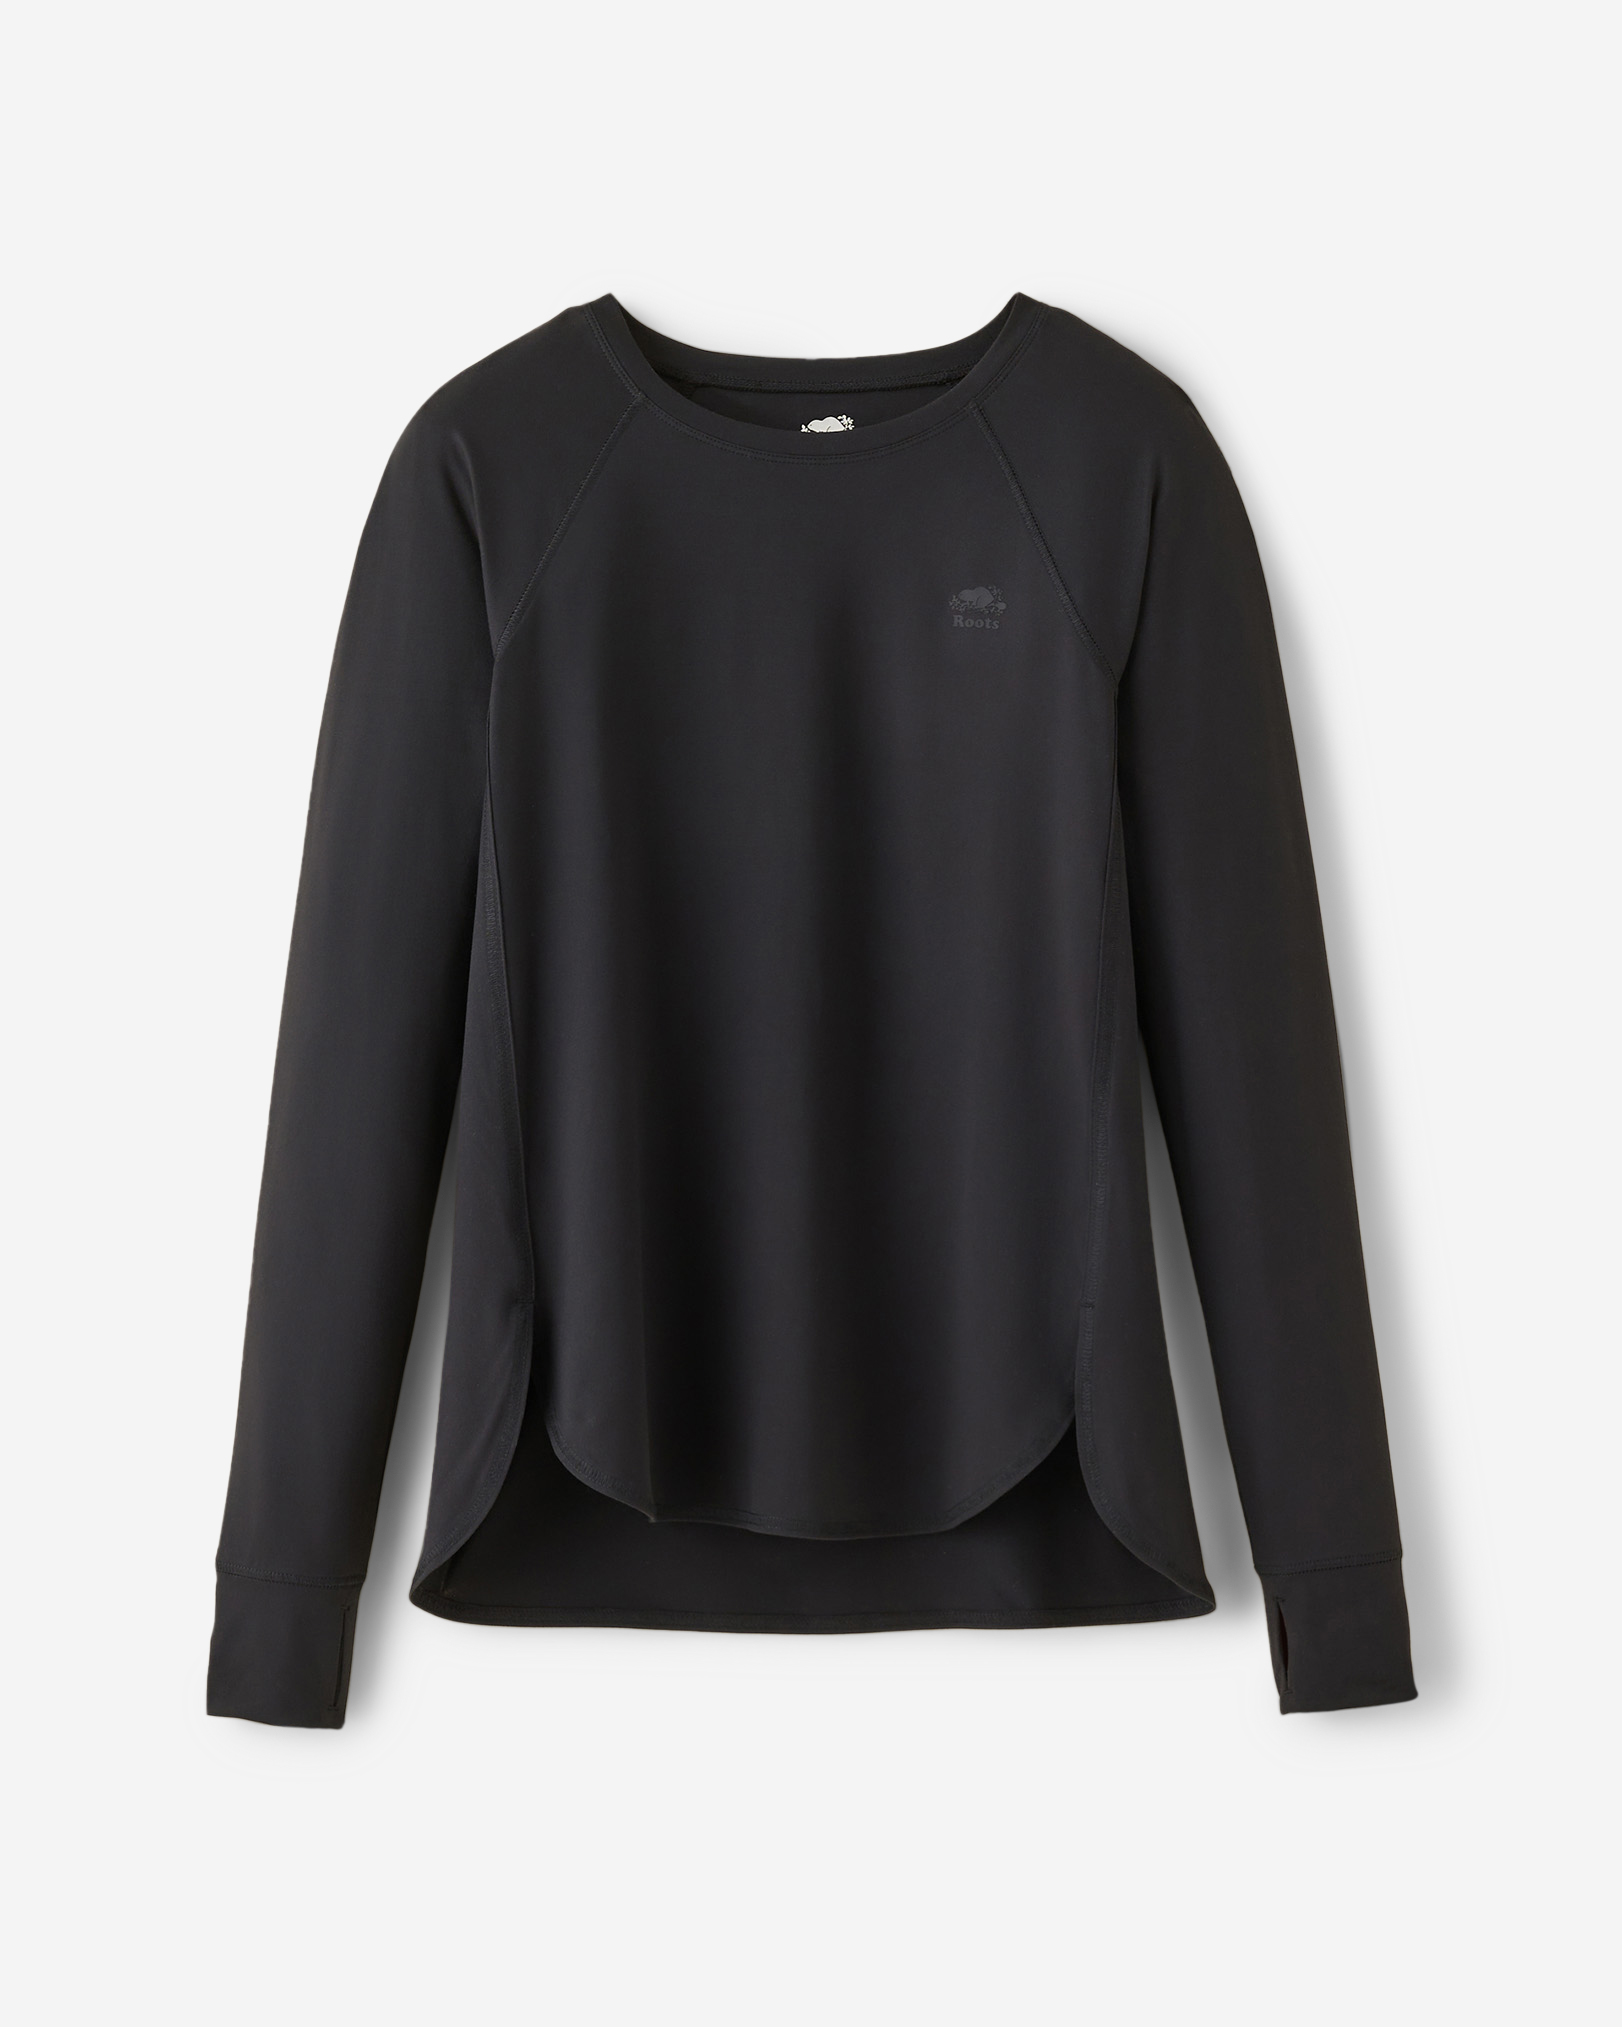 Roots Renew Long Sleeve Top in